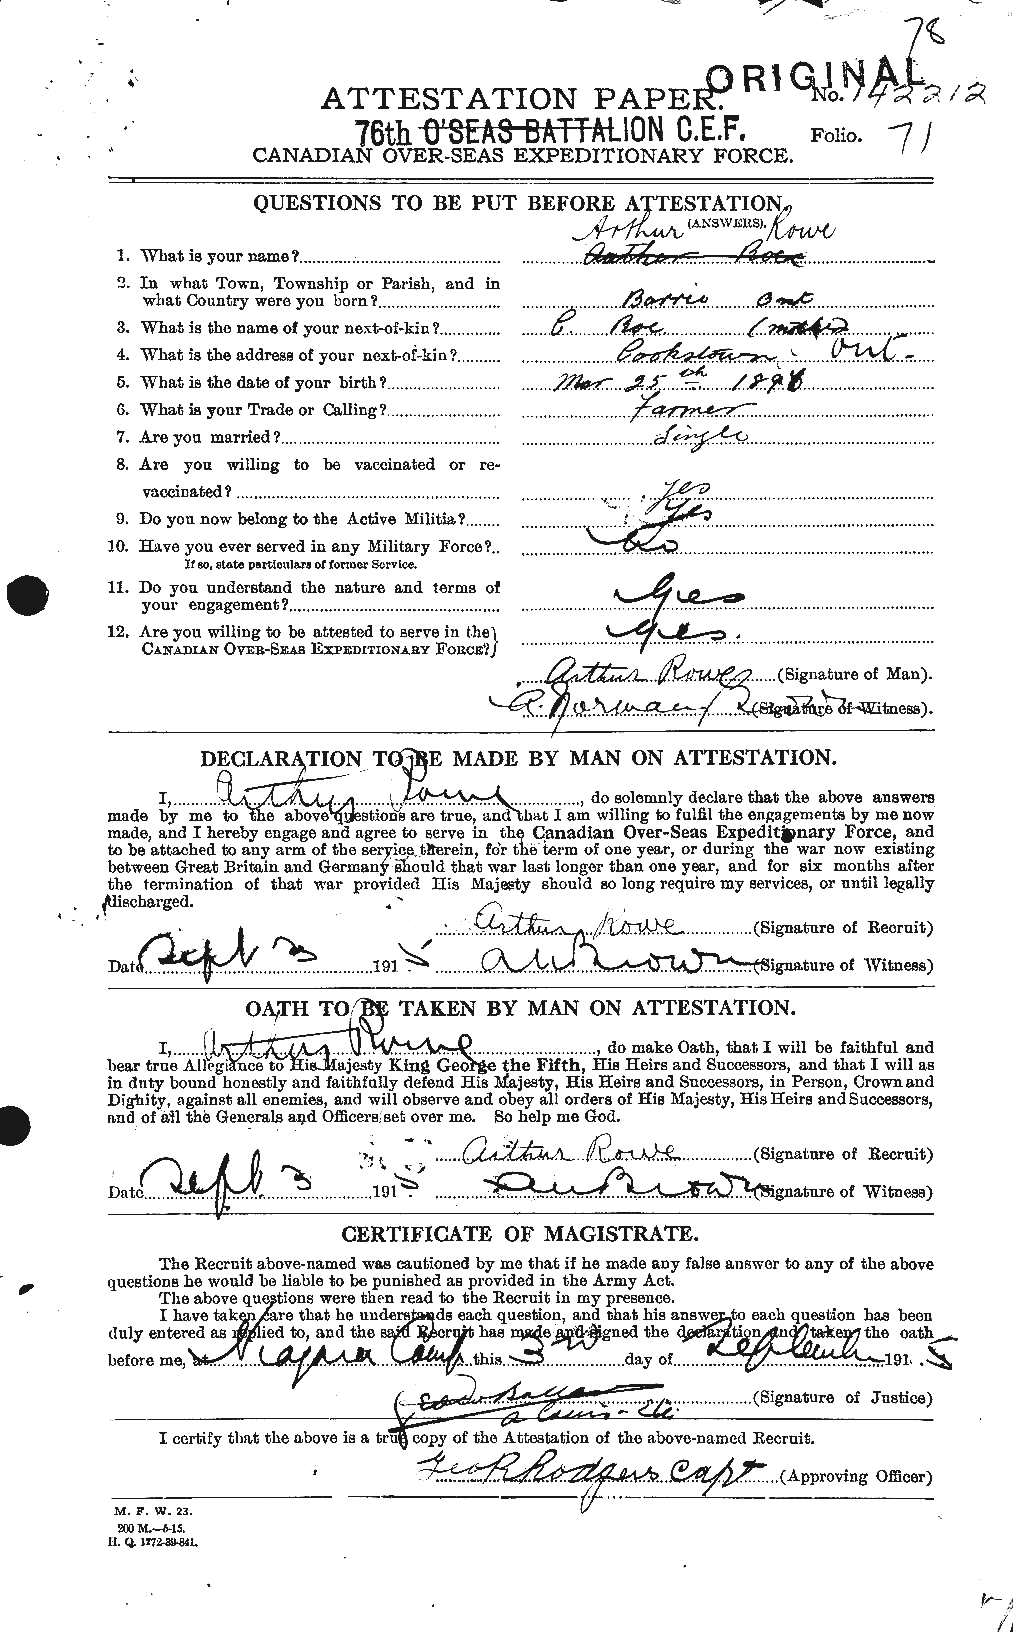 Personnel Records of the First World War - CEF 615791a